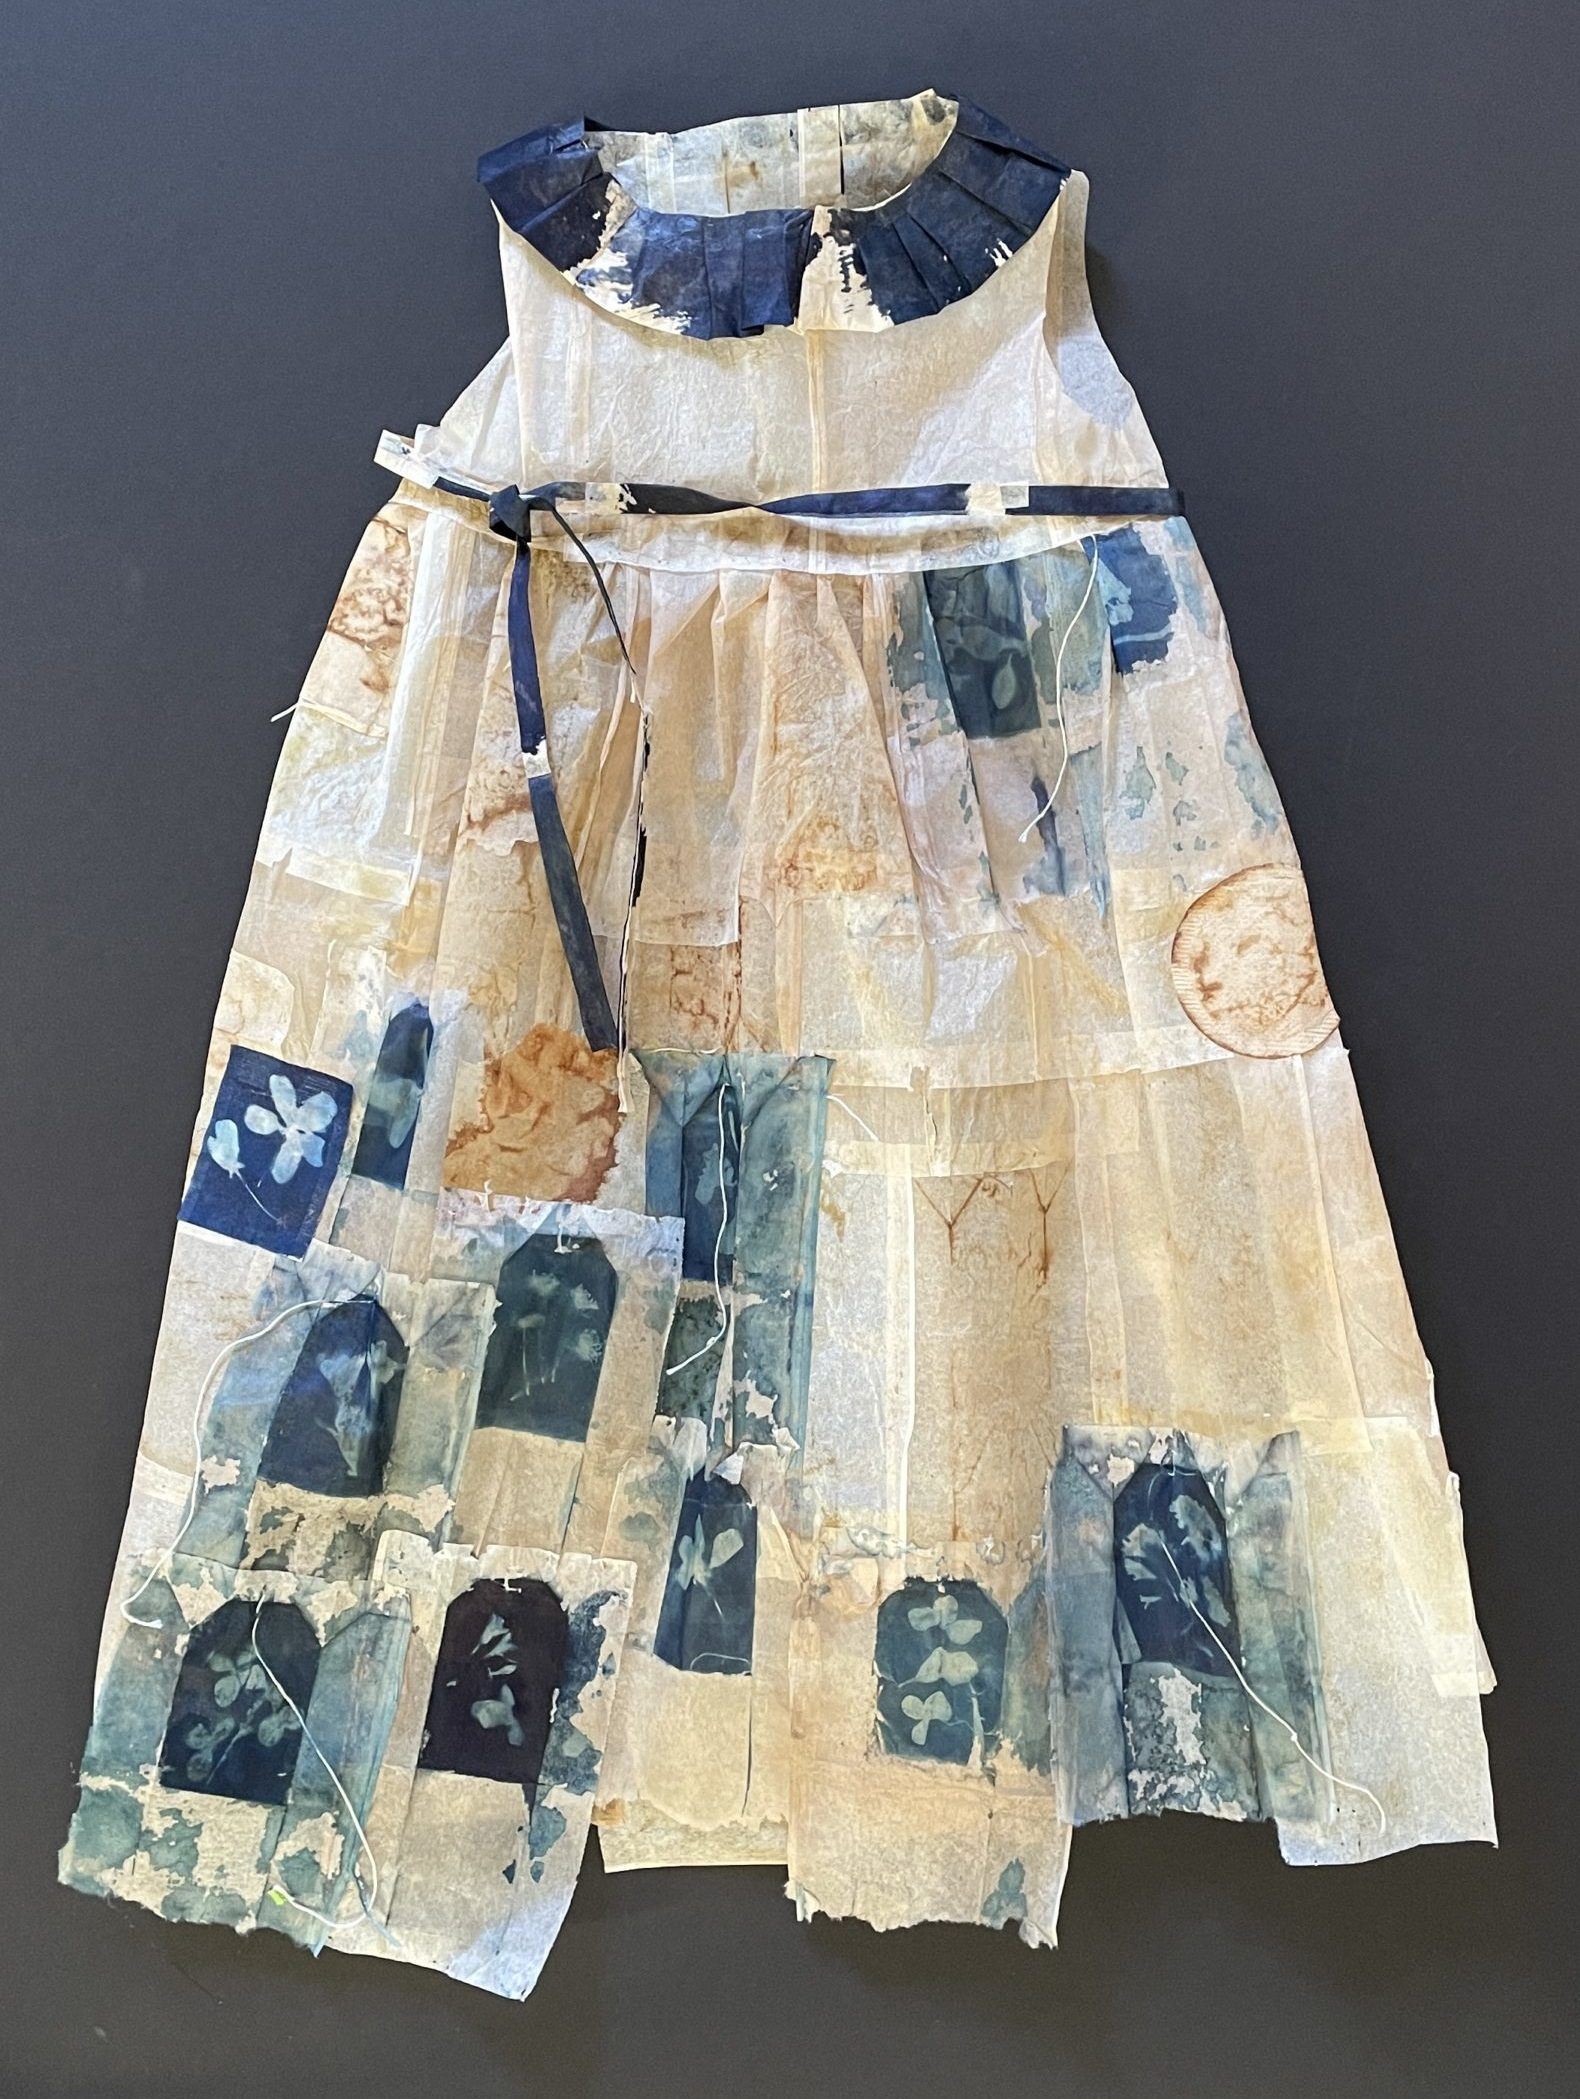 A child's dress made out of tea bags.